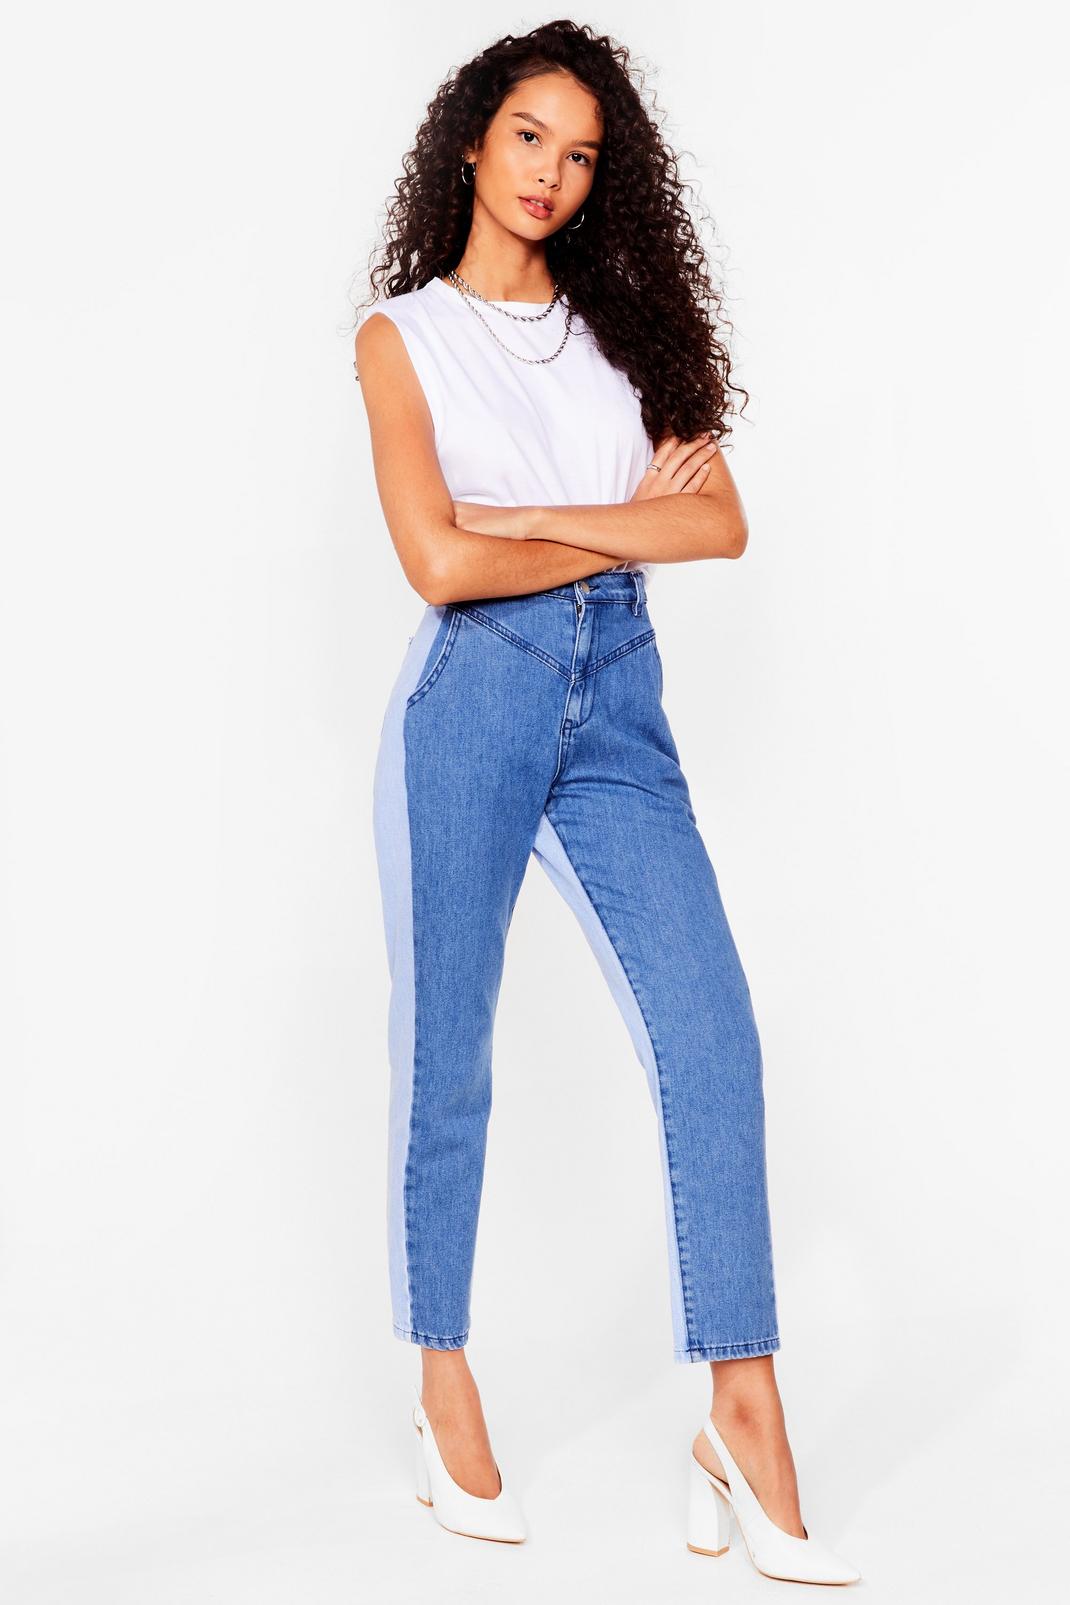 Opposites Attract Two-Tone Mom Jeans | Nasty Gal